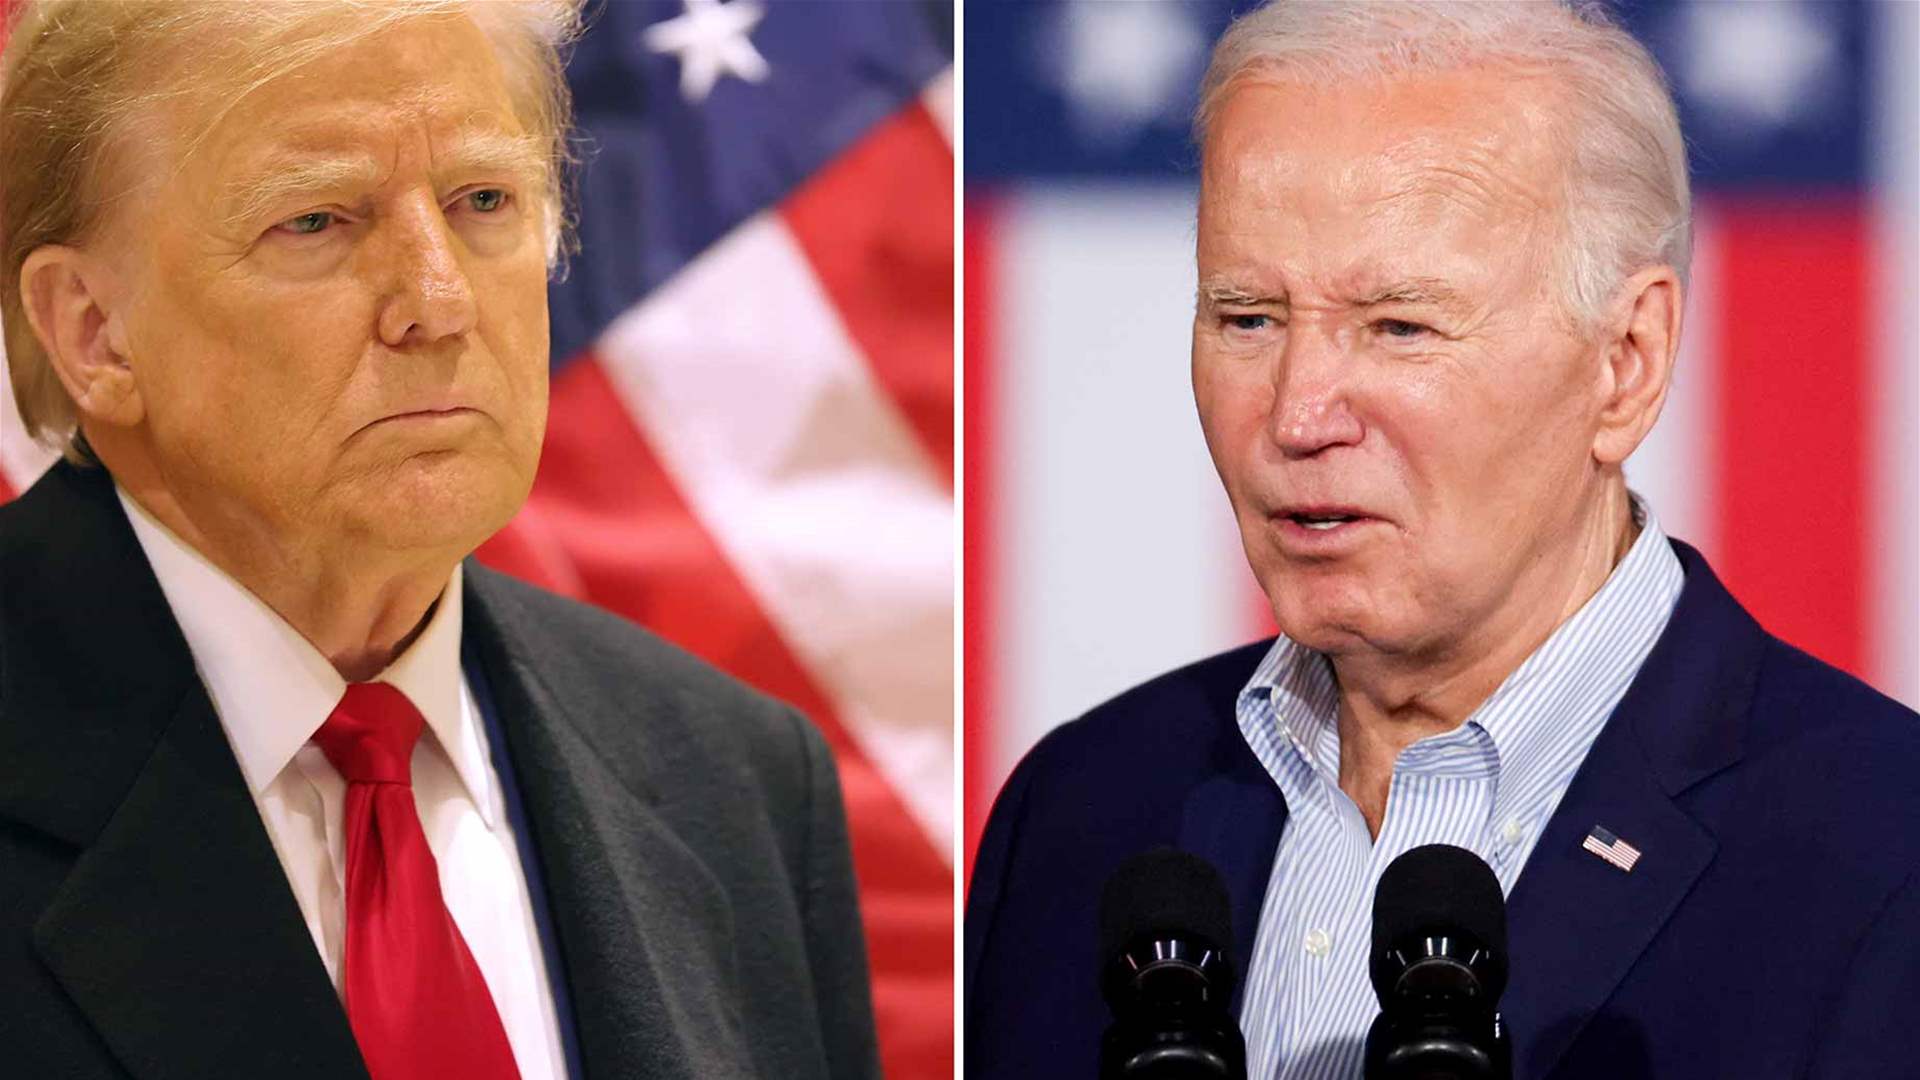 Biden: Trump is a &#39;convicted felon&#39; who is unfit for office